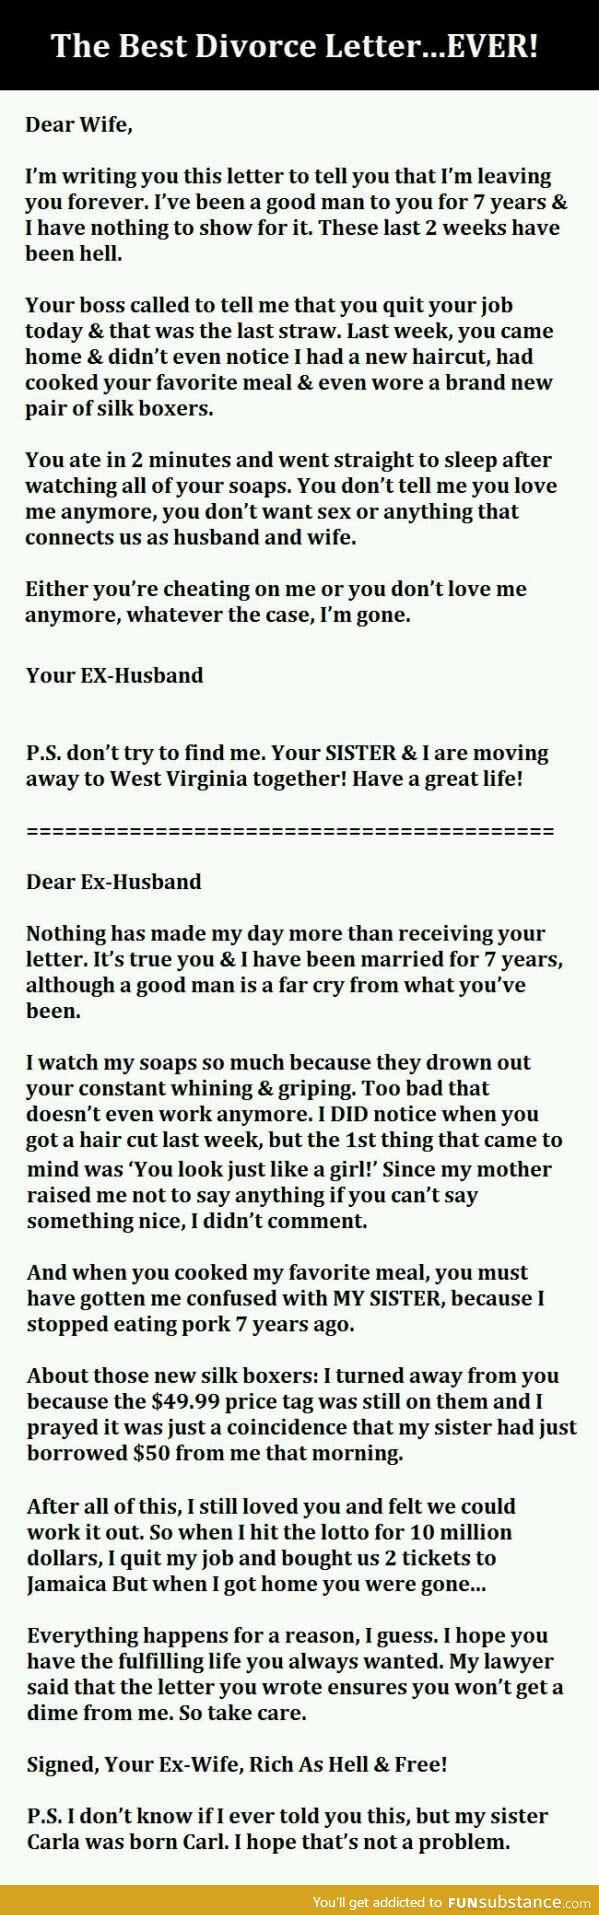 Now that's the best divorce letter ever